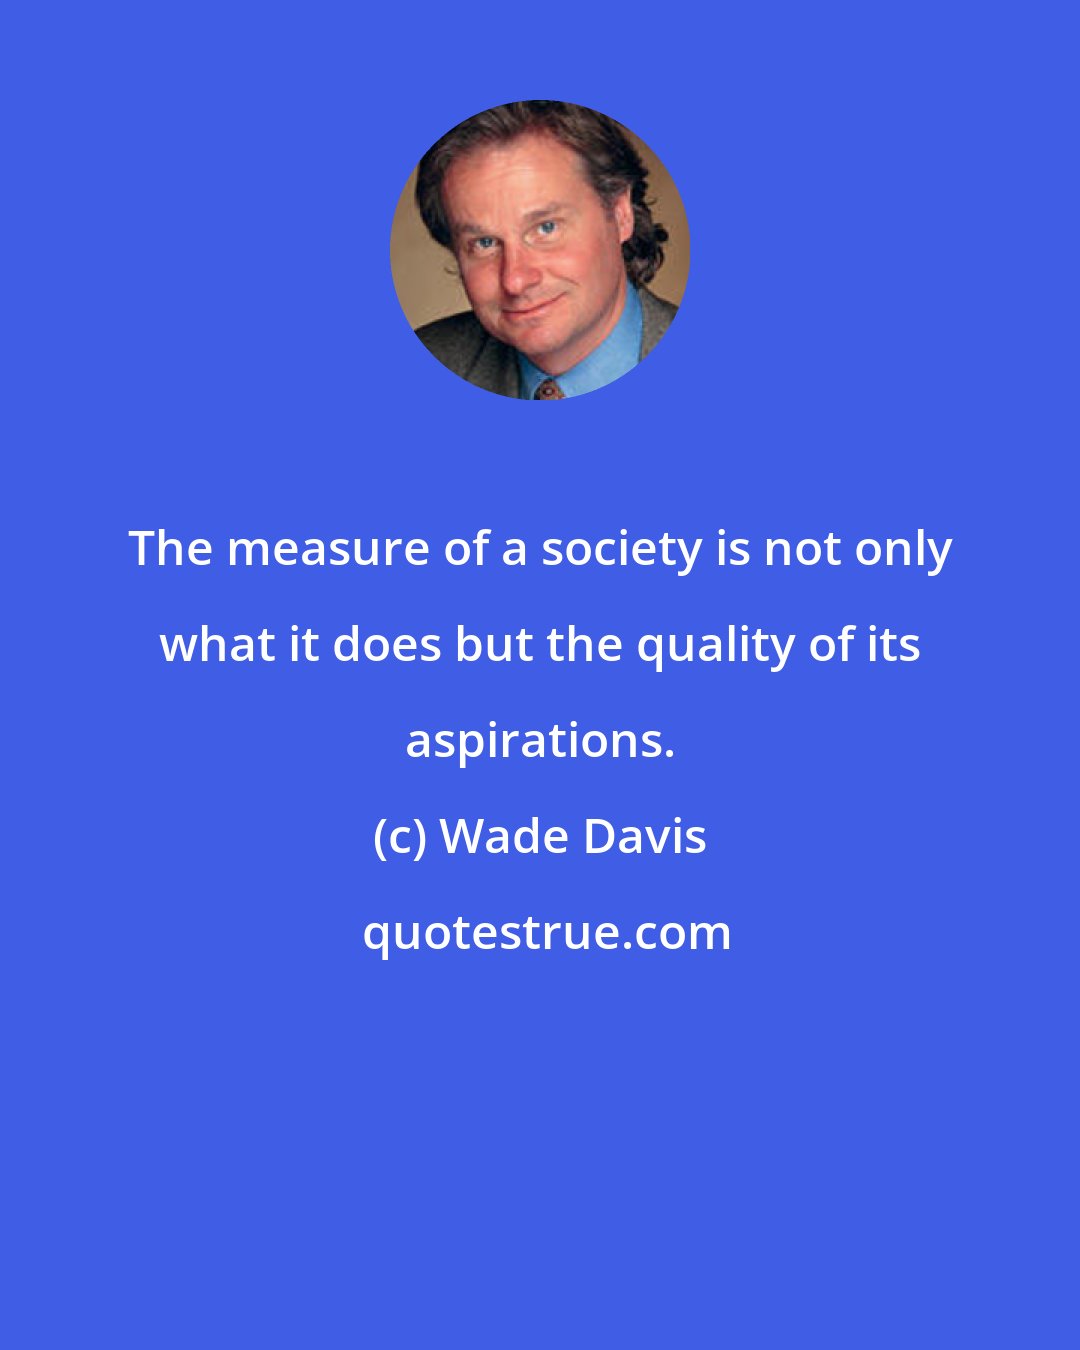 Wade Davis: The measure of a society is not only what it does but the quality of its aspirations.